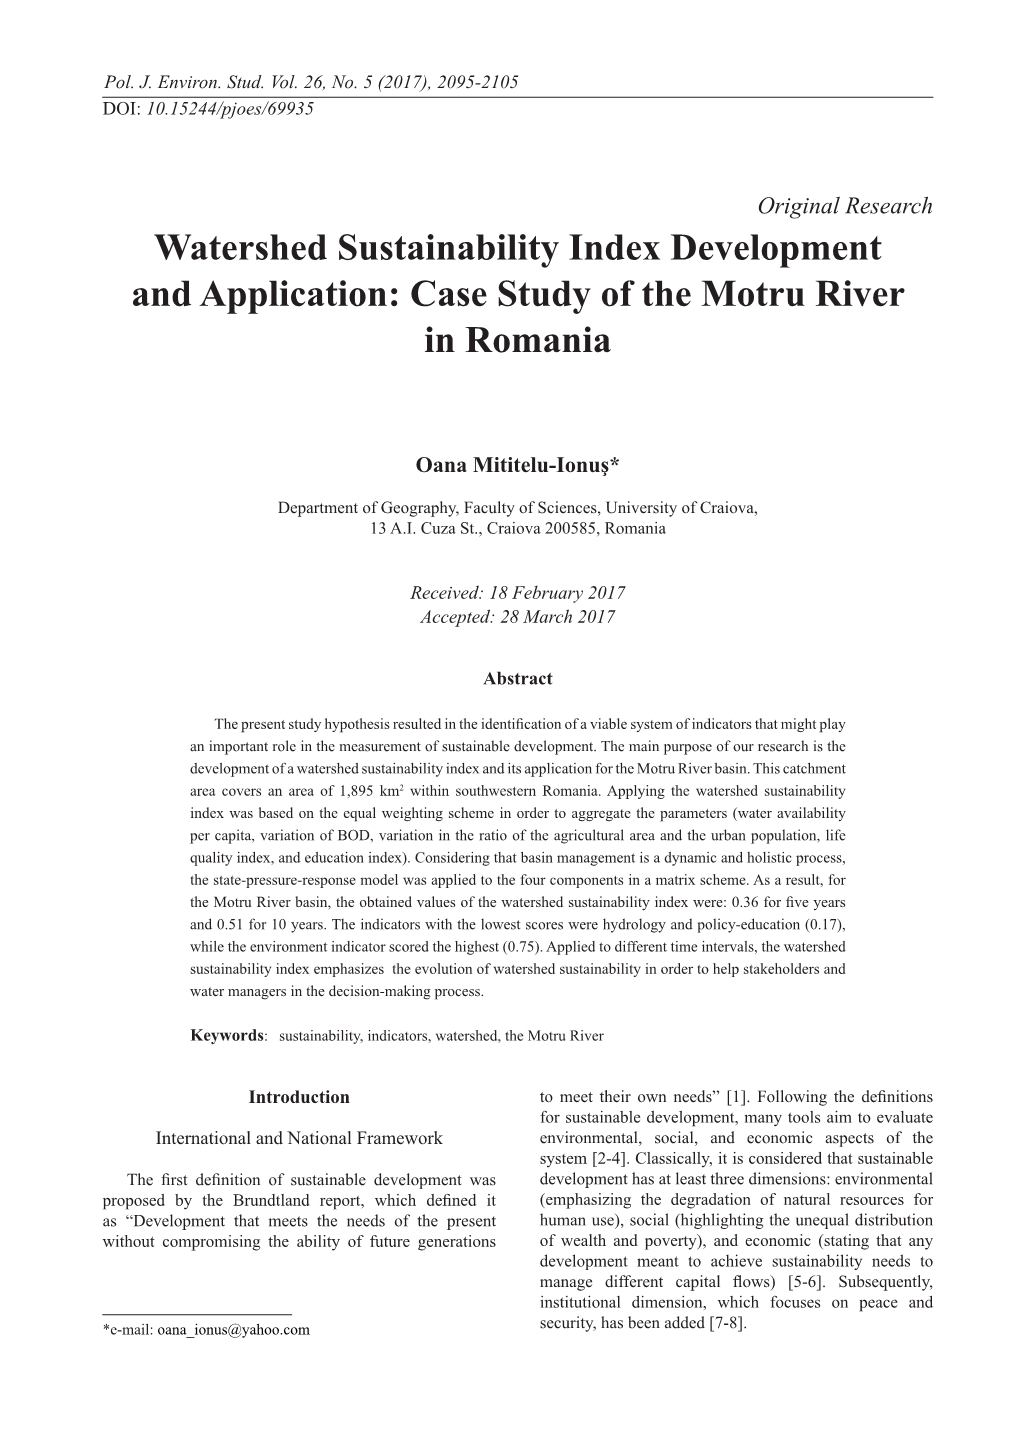 Watershed Sustainability Index Development and Application: Case Study of the Motru River in Romania